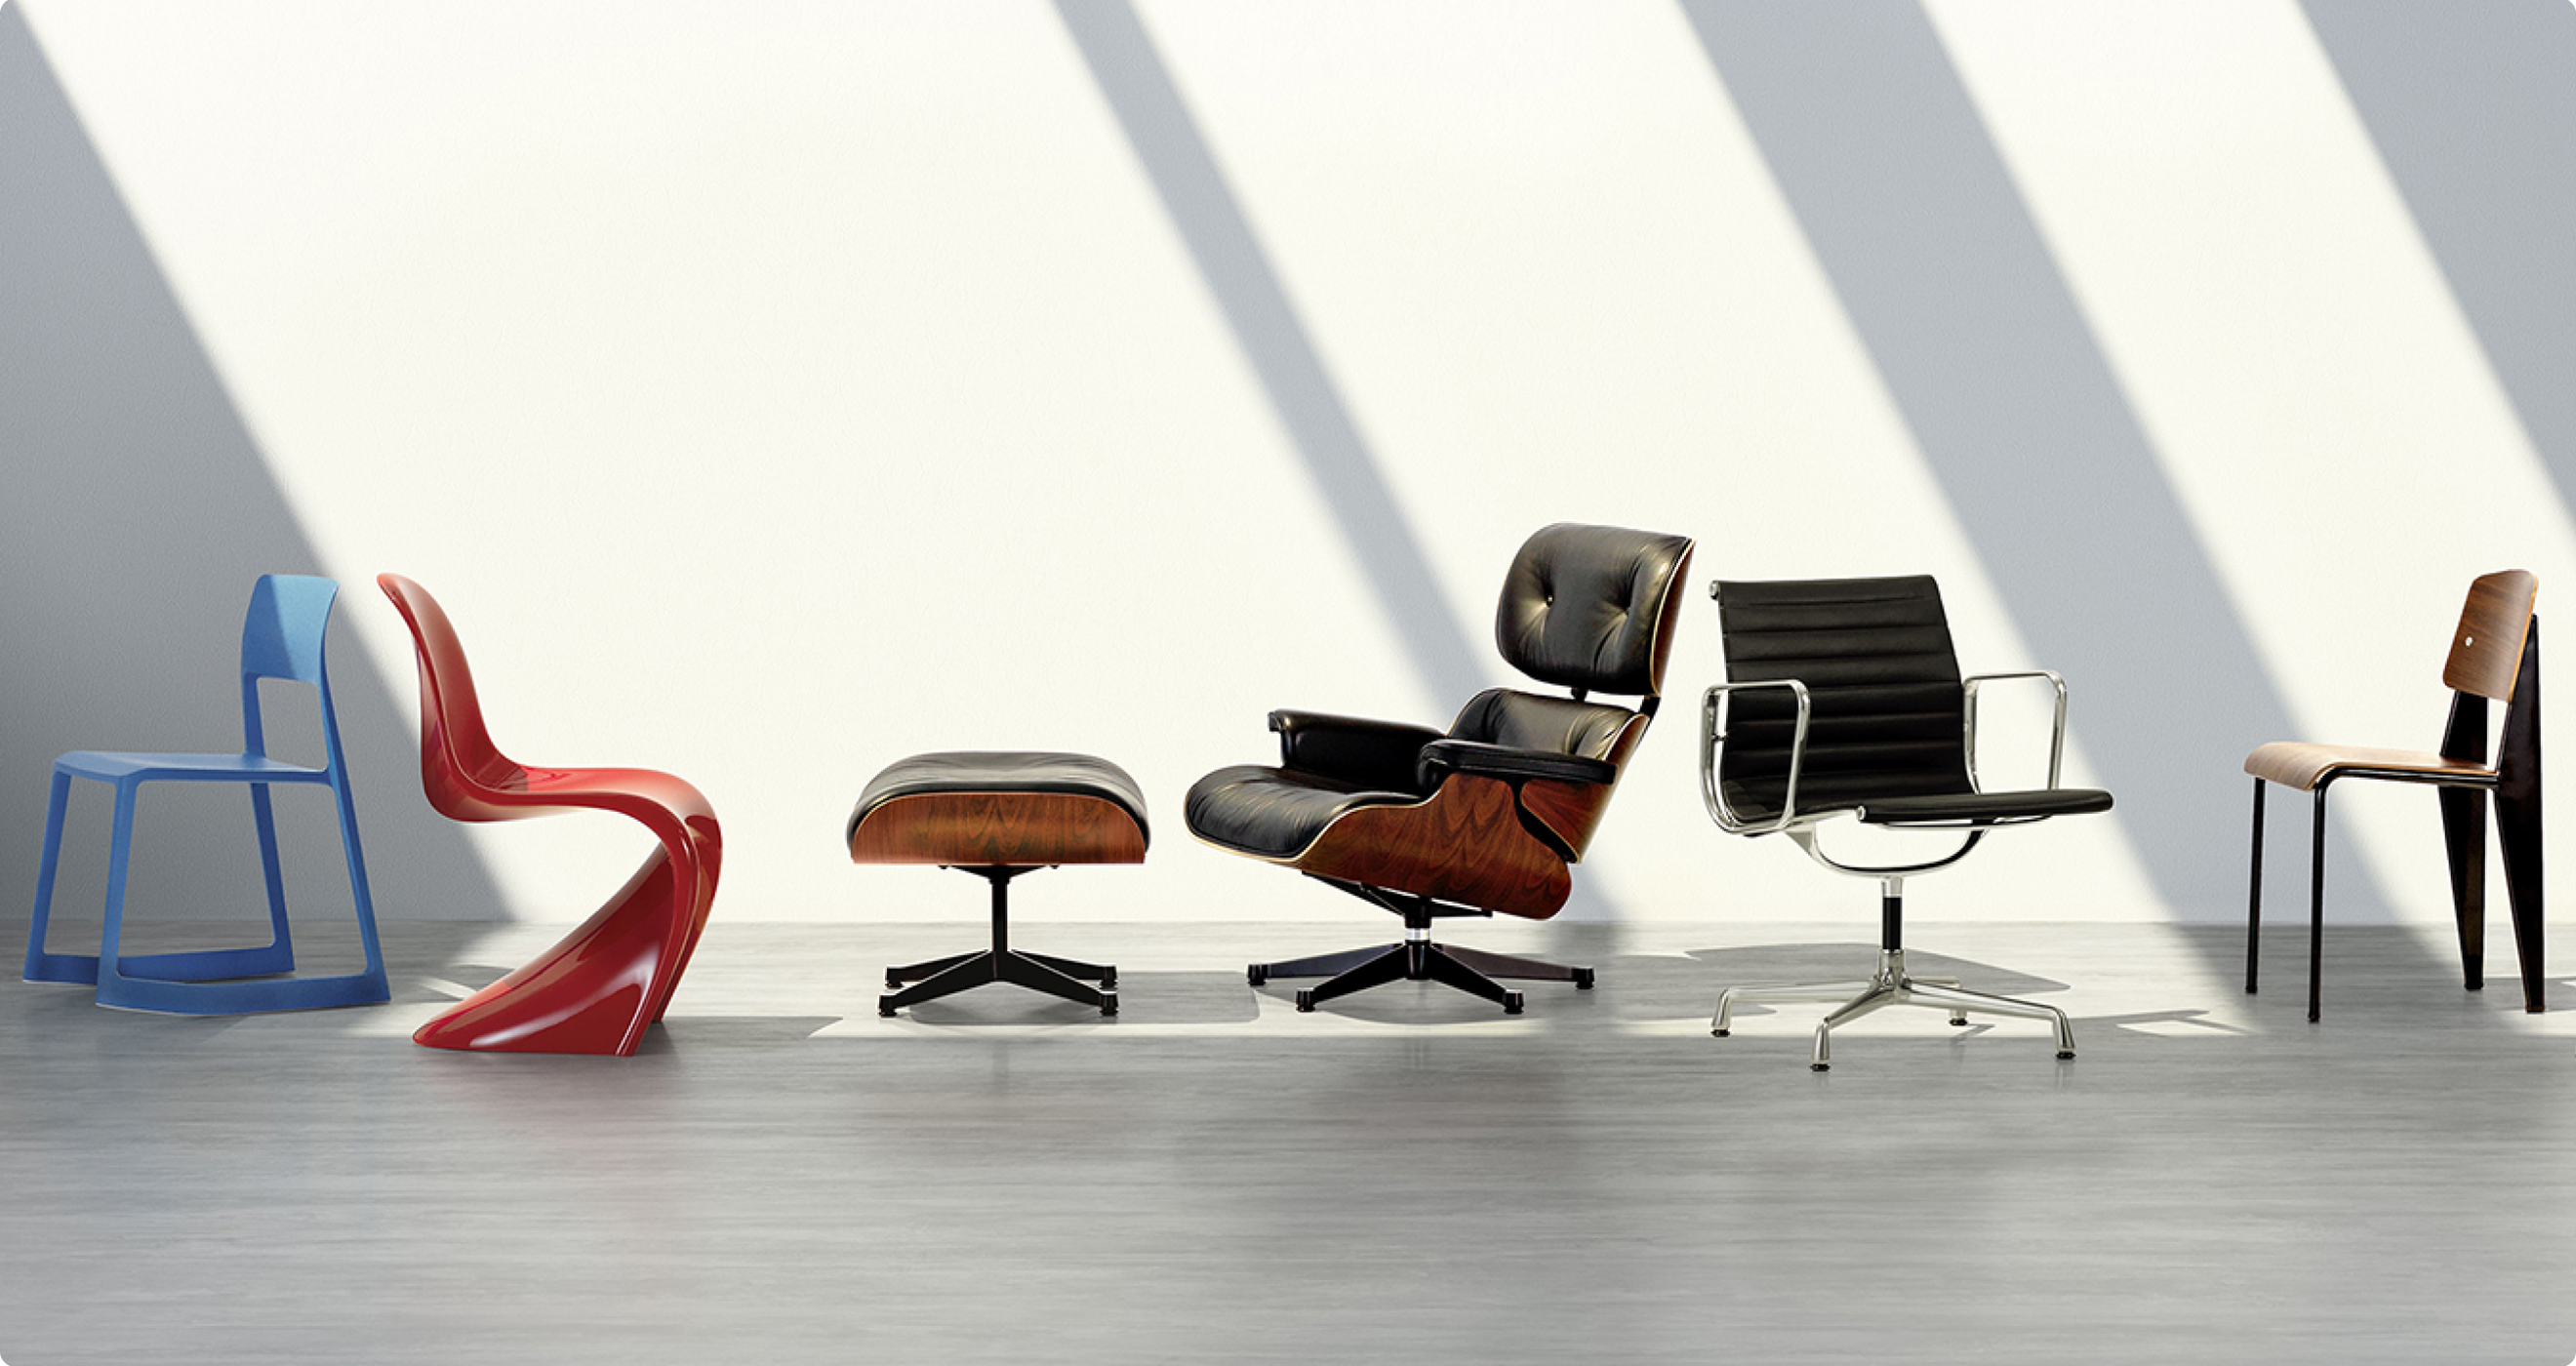 The Conran Shop Chairs including Vitra and Vitra Eames